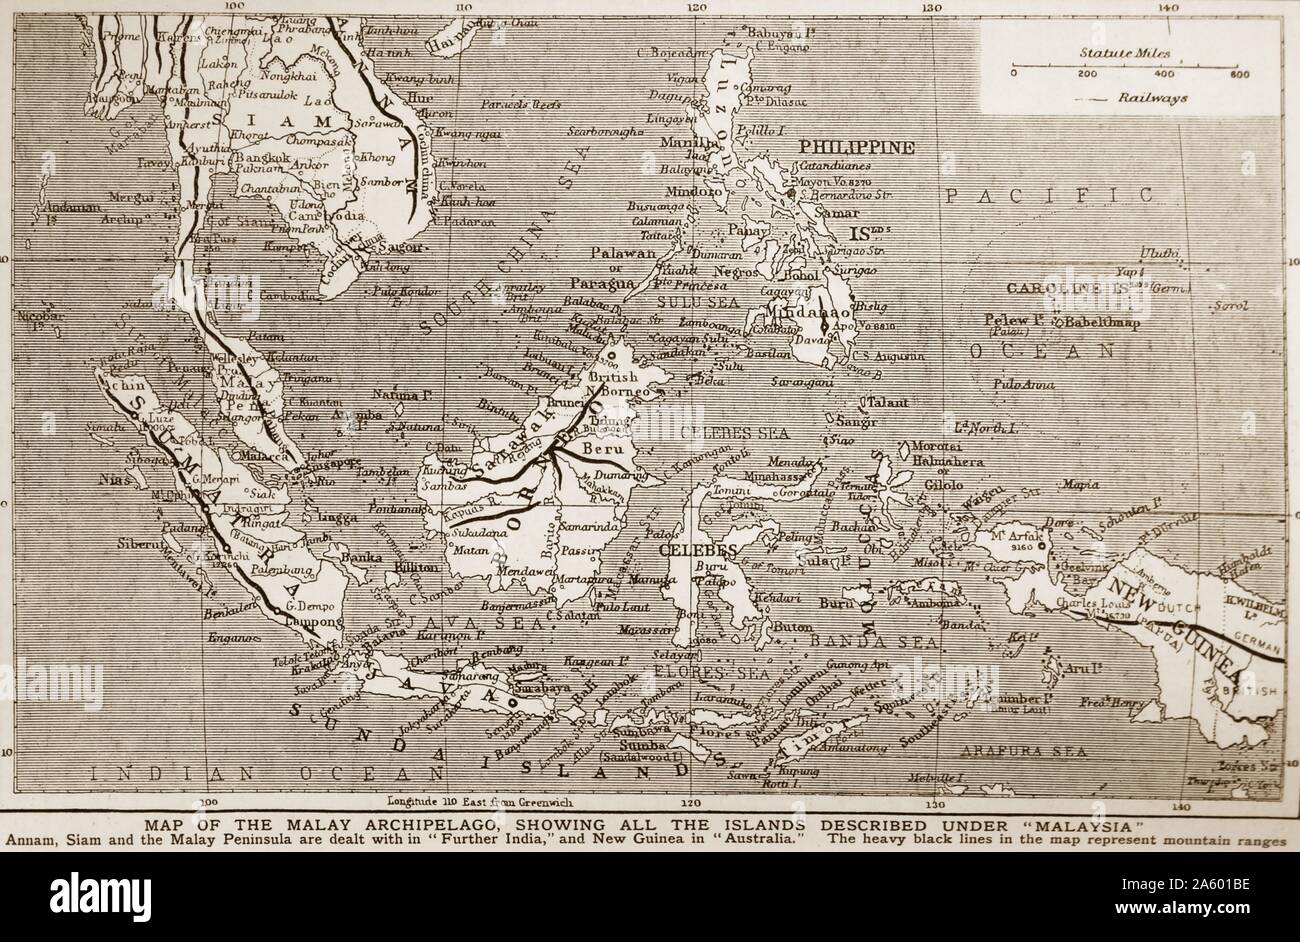 1900 Map of south East Asia showing the Philippines; Malaya; Indonesia (Dutch East Indies). Stock Photo